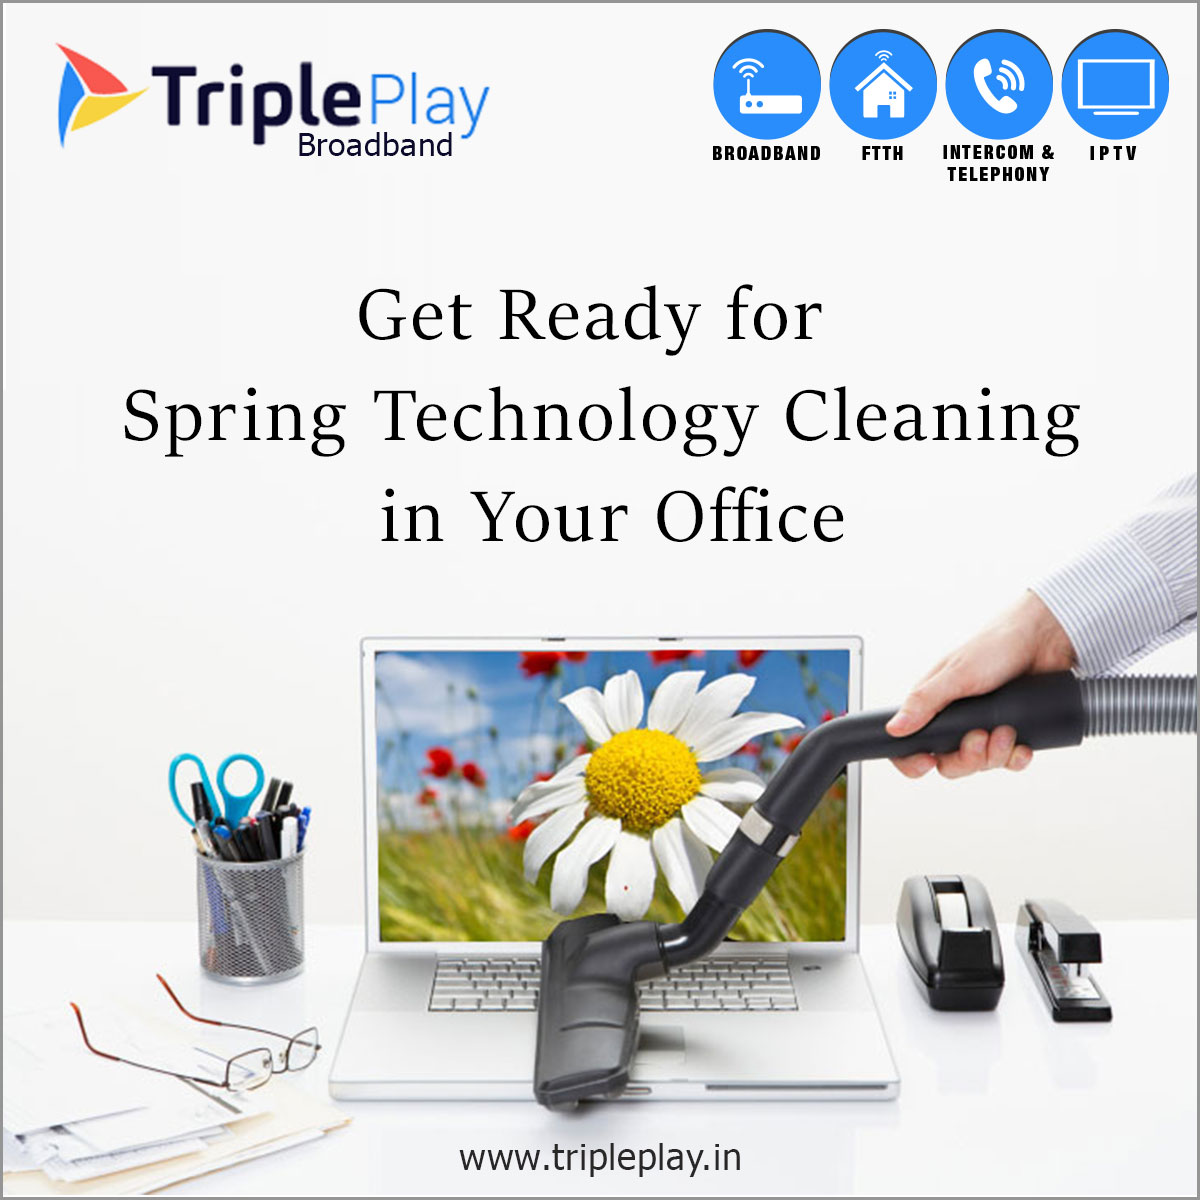 Get Ready for Spring Technology Cleaning in Your Office